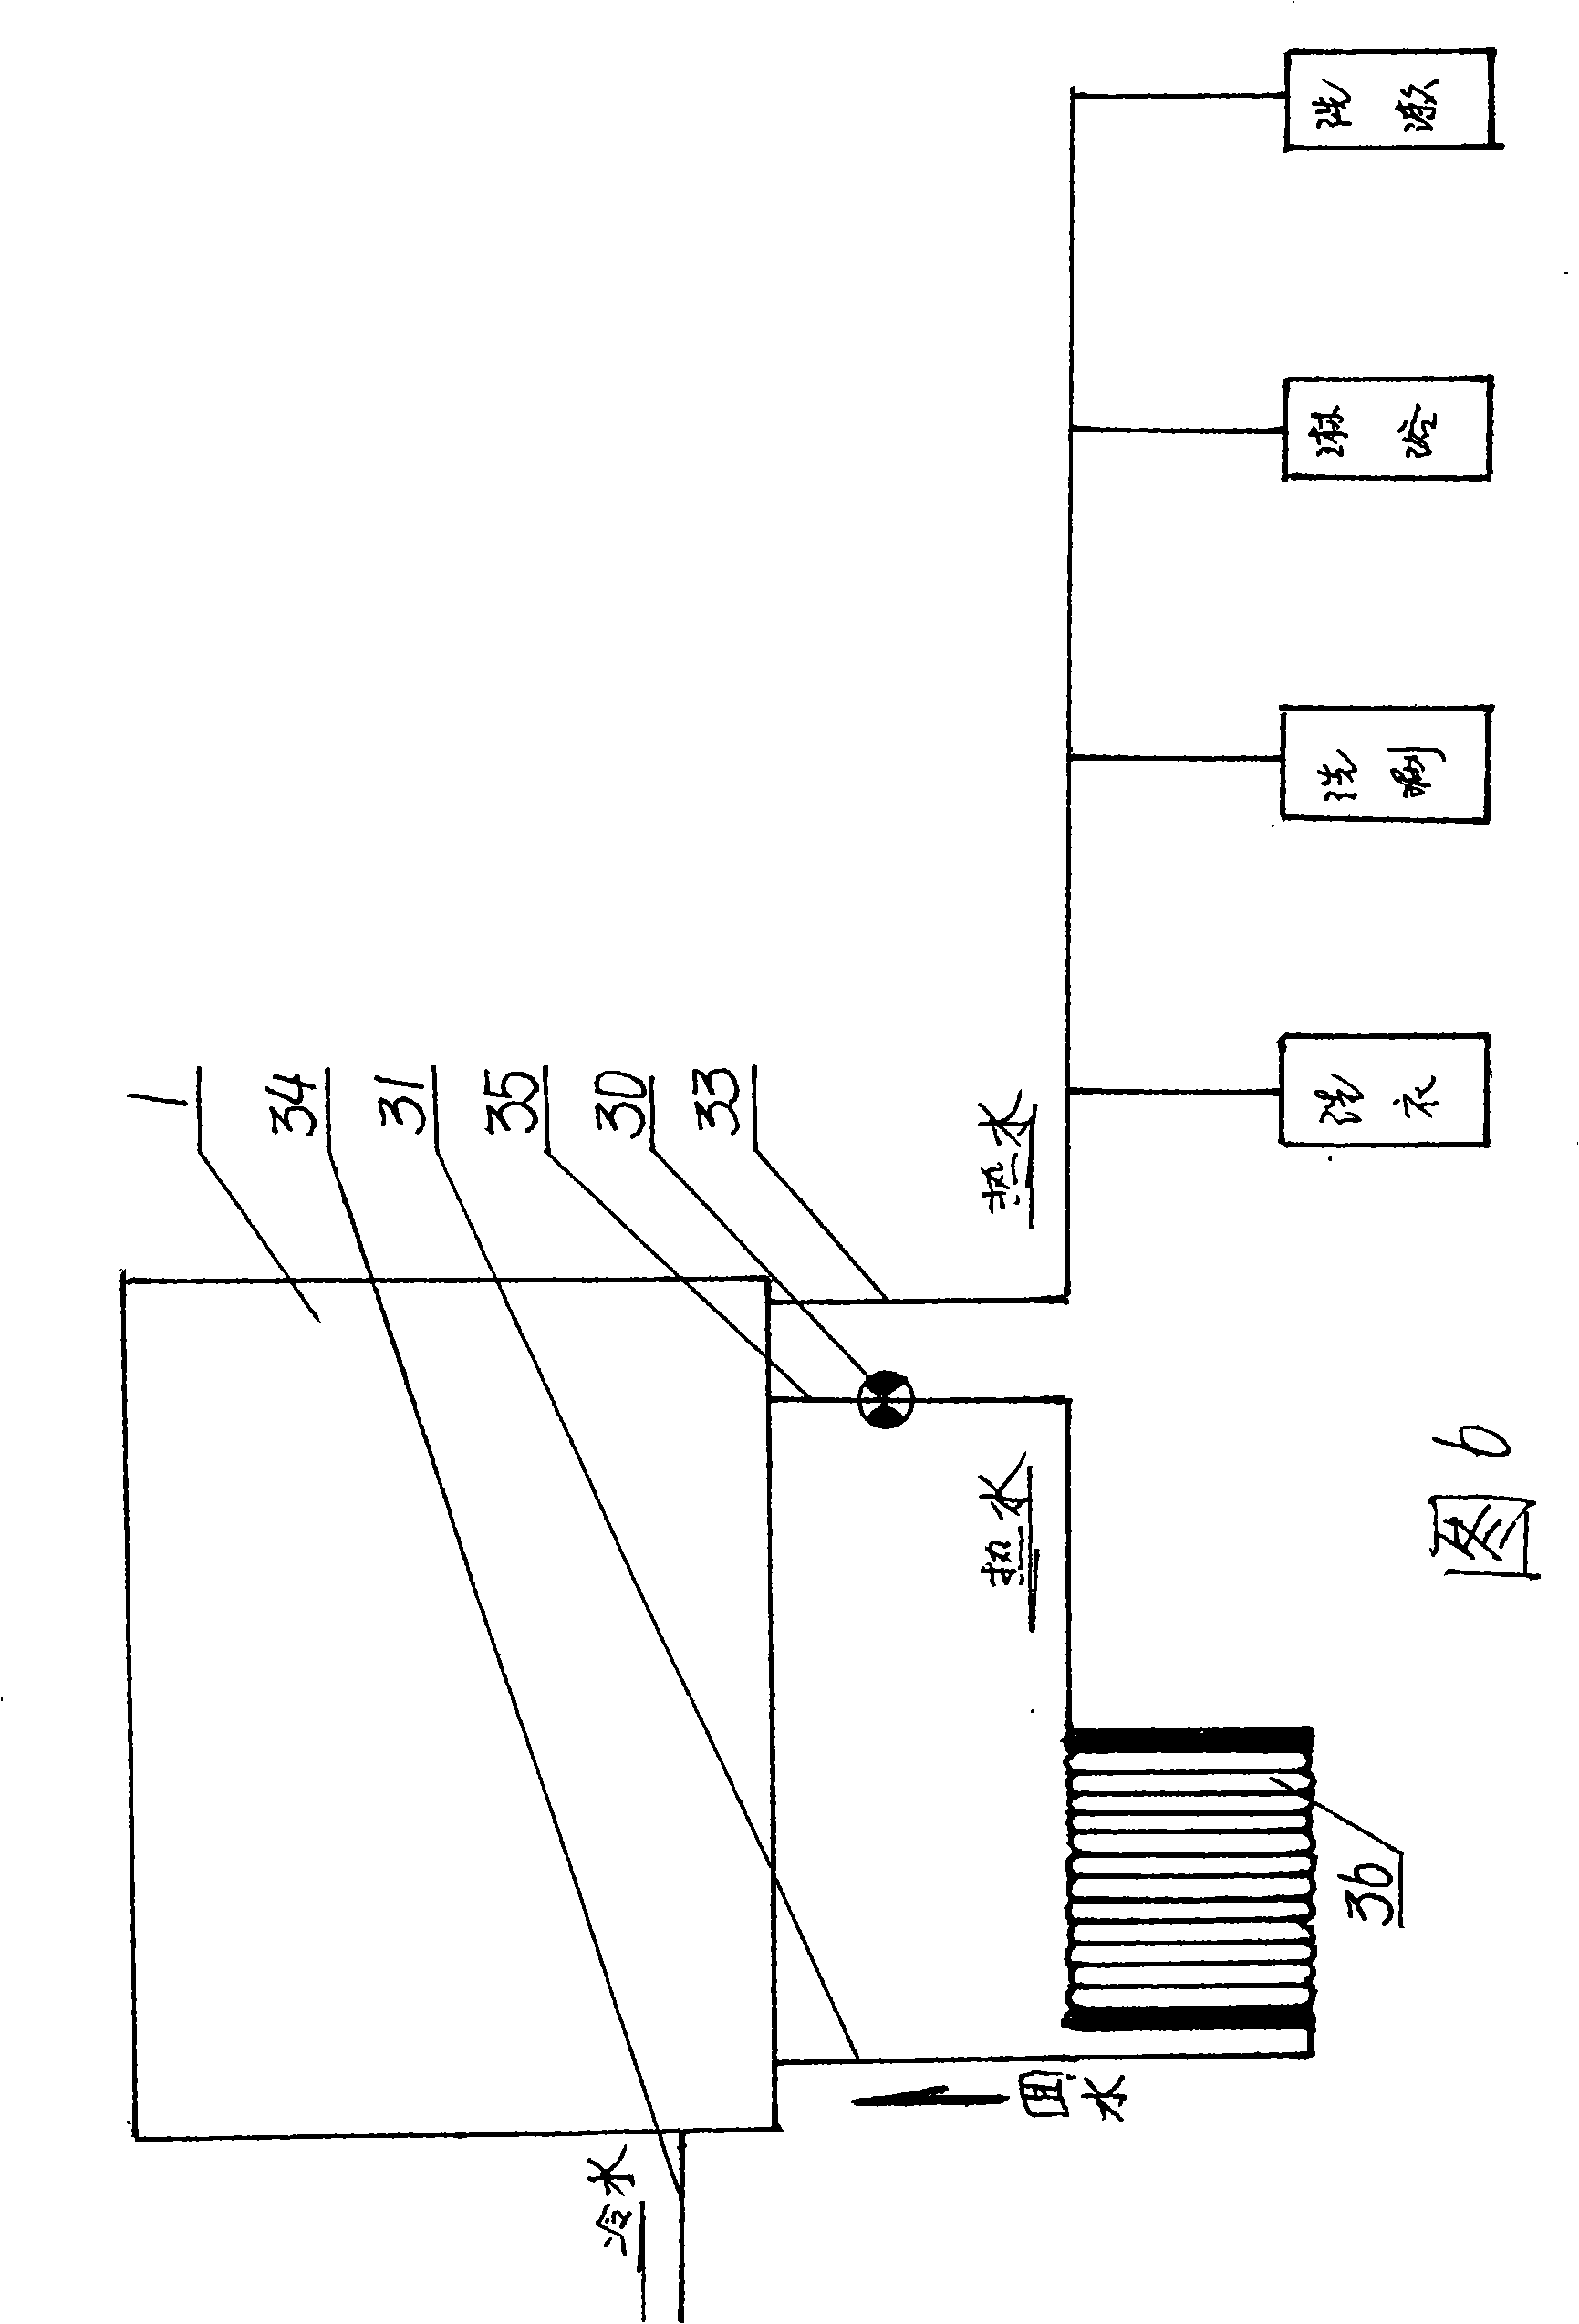 High-frequency microwave heating water heater